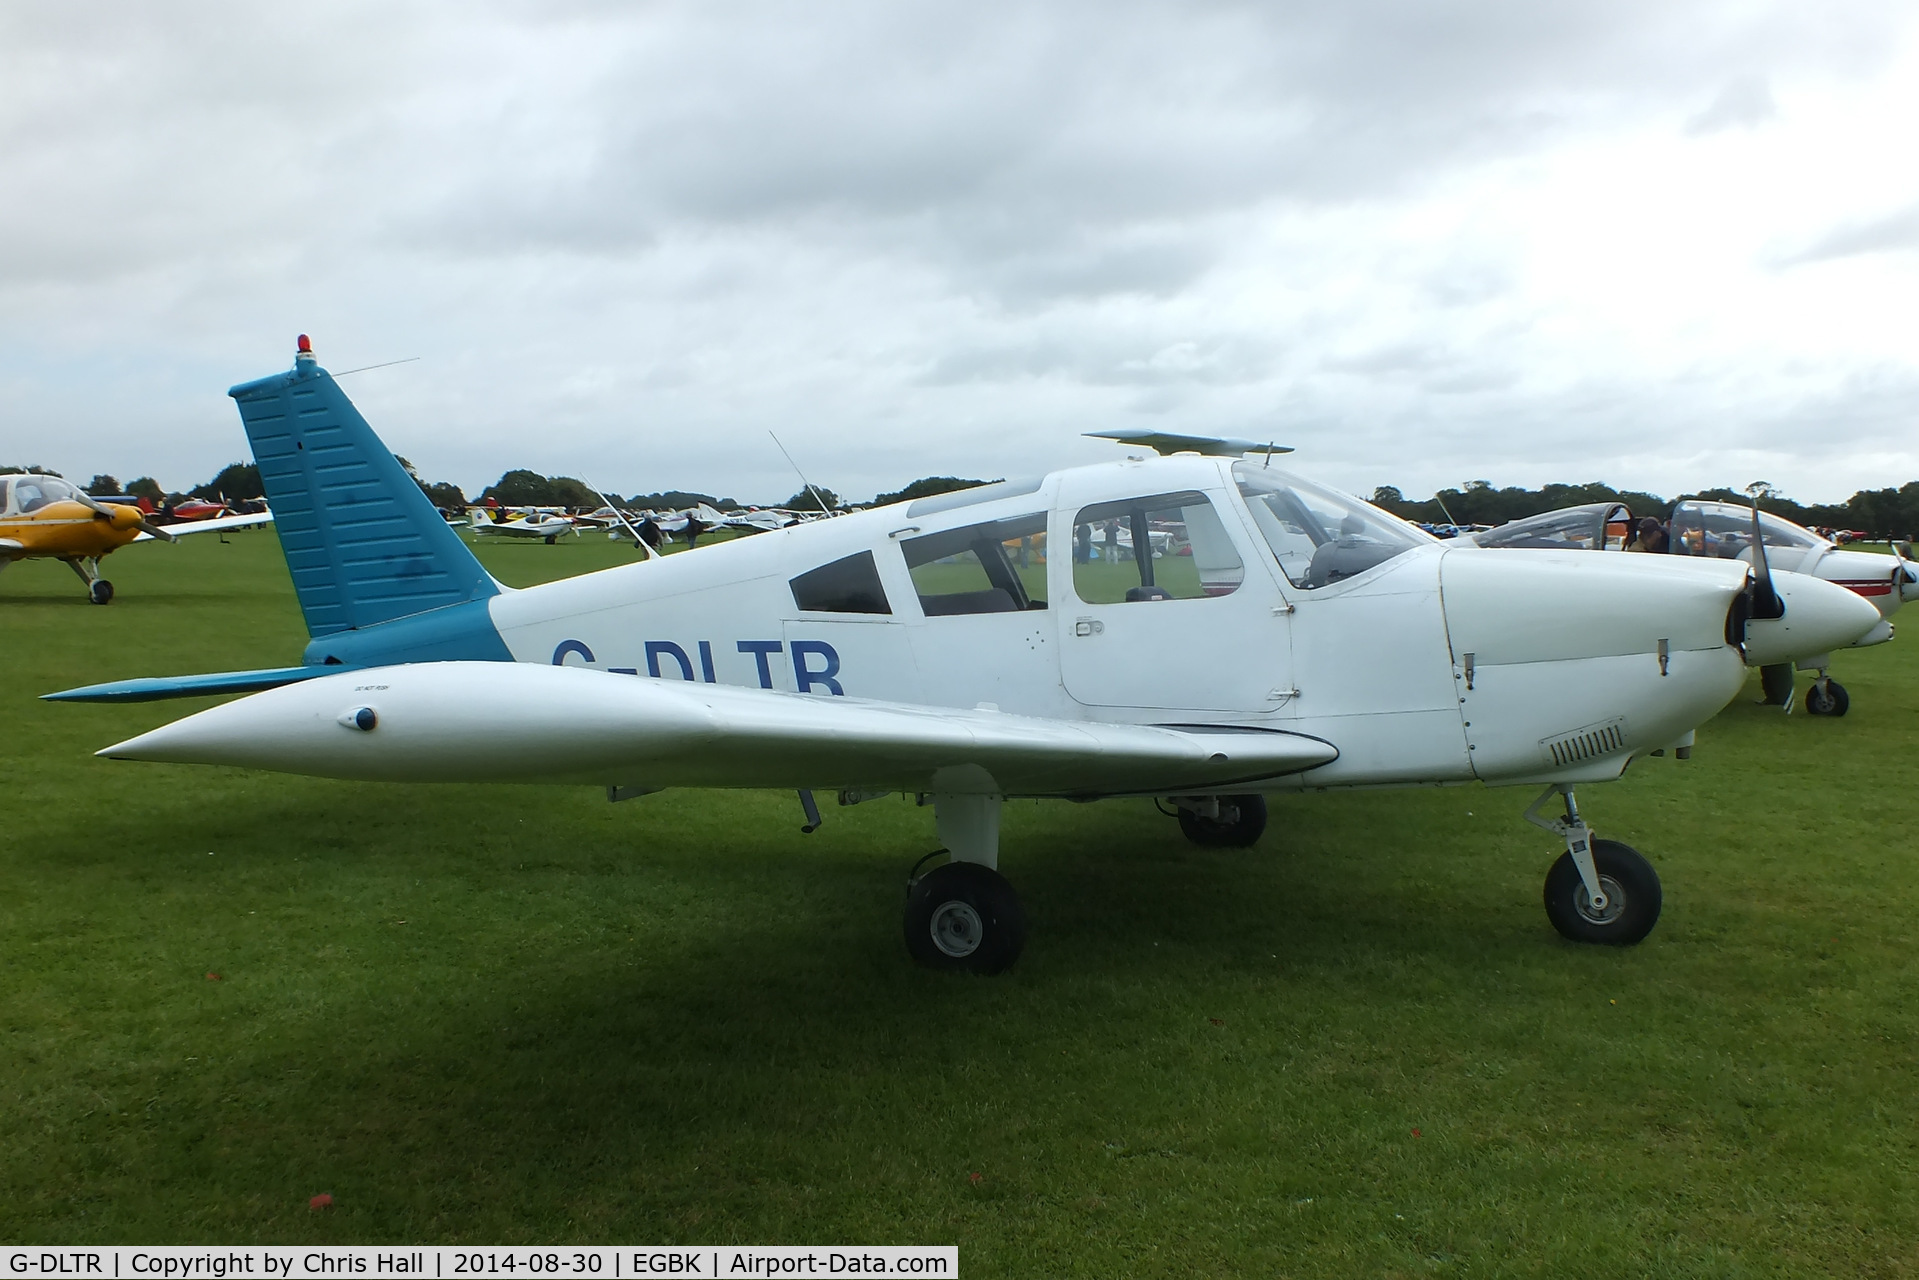 G-DLTR, 1970 Piper PA-28-180 Cherokee C/N 28-5803, at the LAA Rally 2014, Sywell